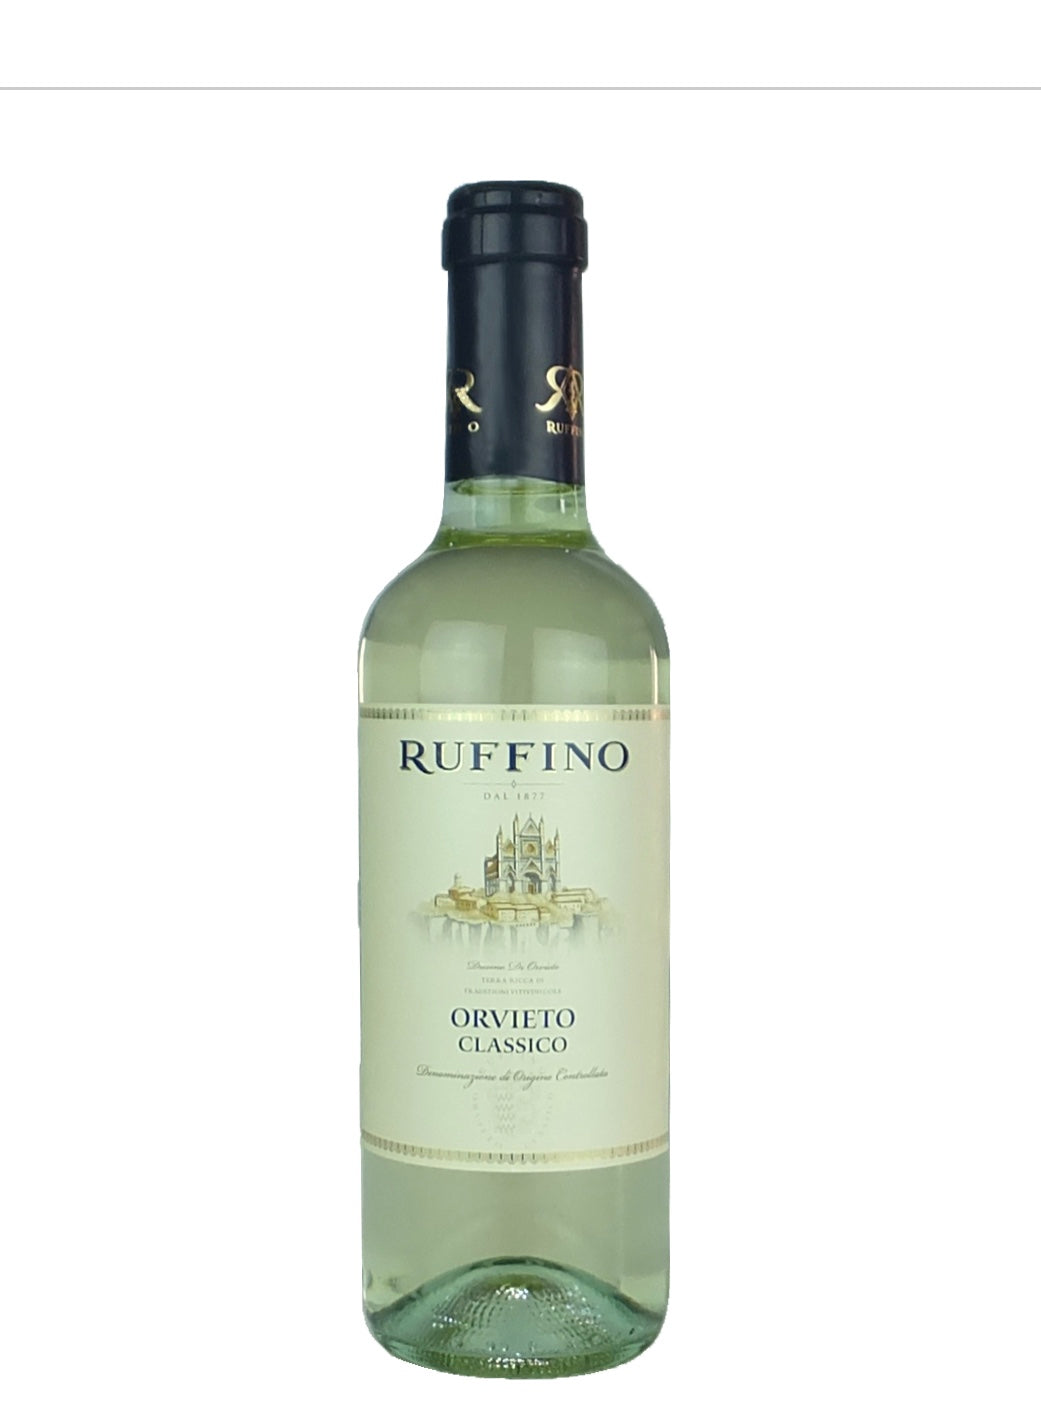 12 Orvieto DOC Classico, Ruffino, 37.5cl (2020), DELIVERED WITHIN TWO WEEKS